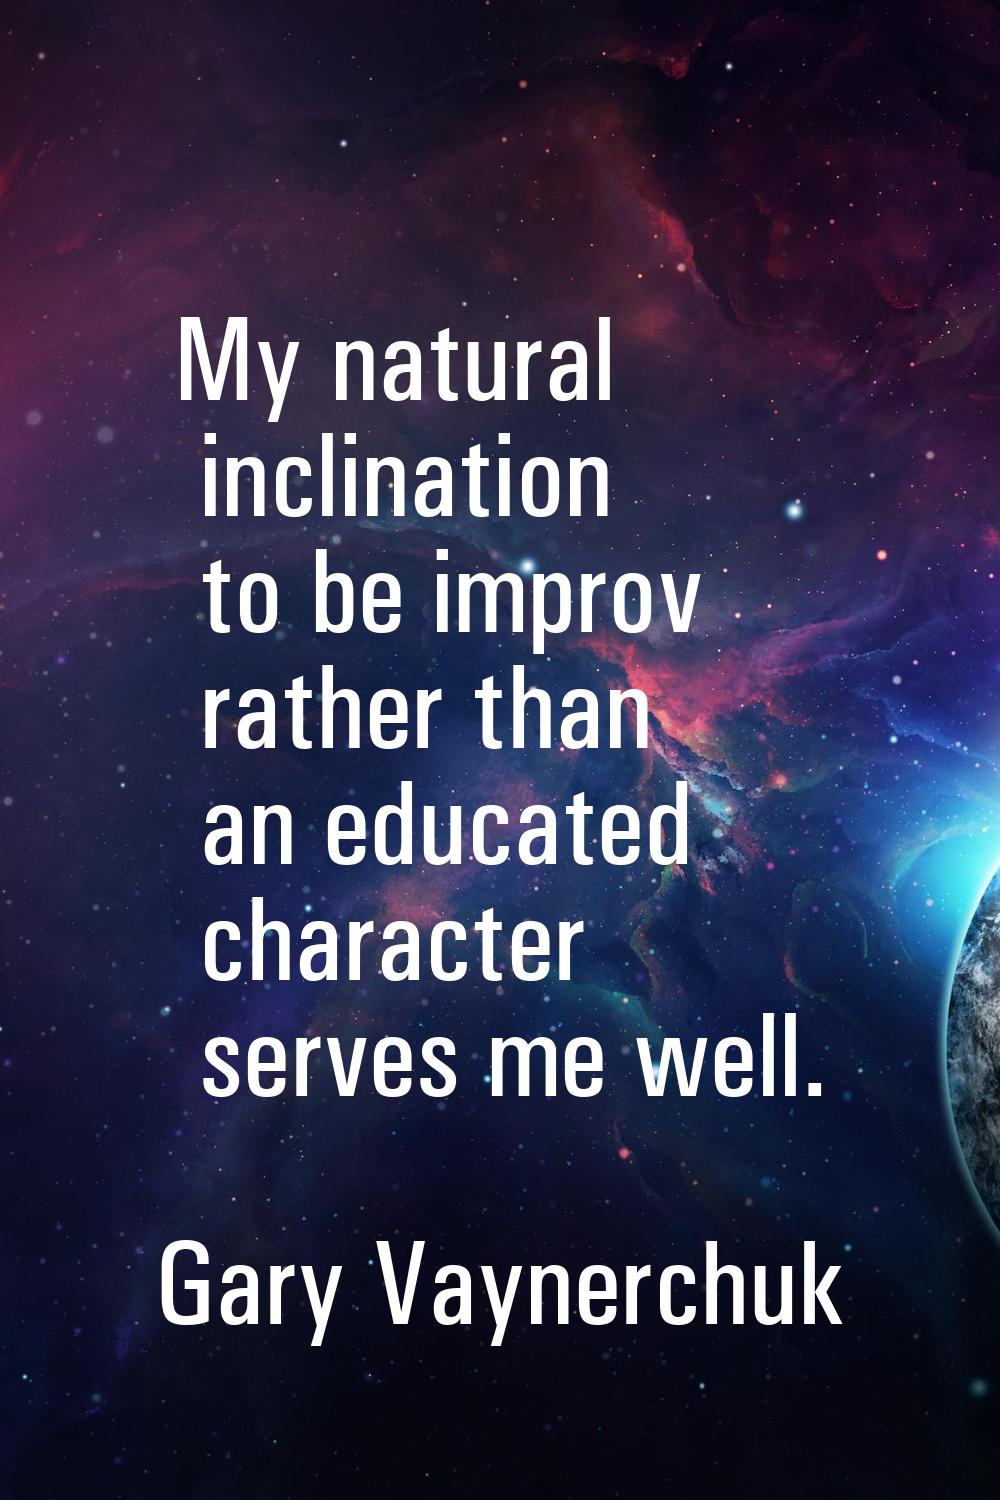 My natural inclination to be improv rather than an educated character serves me well.